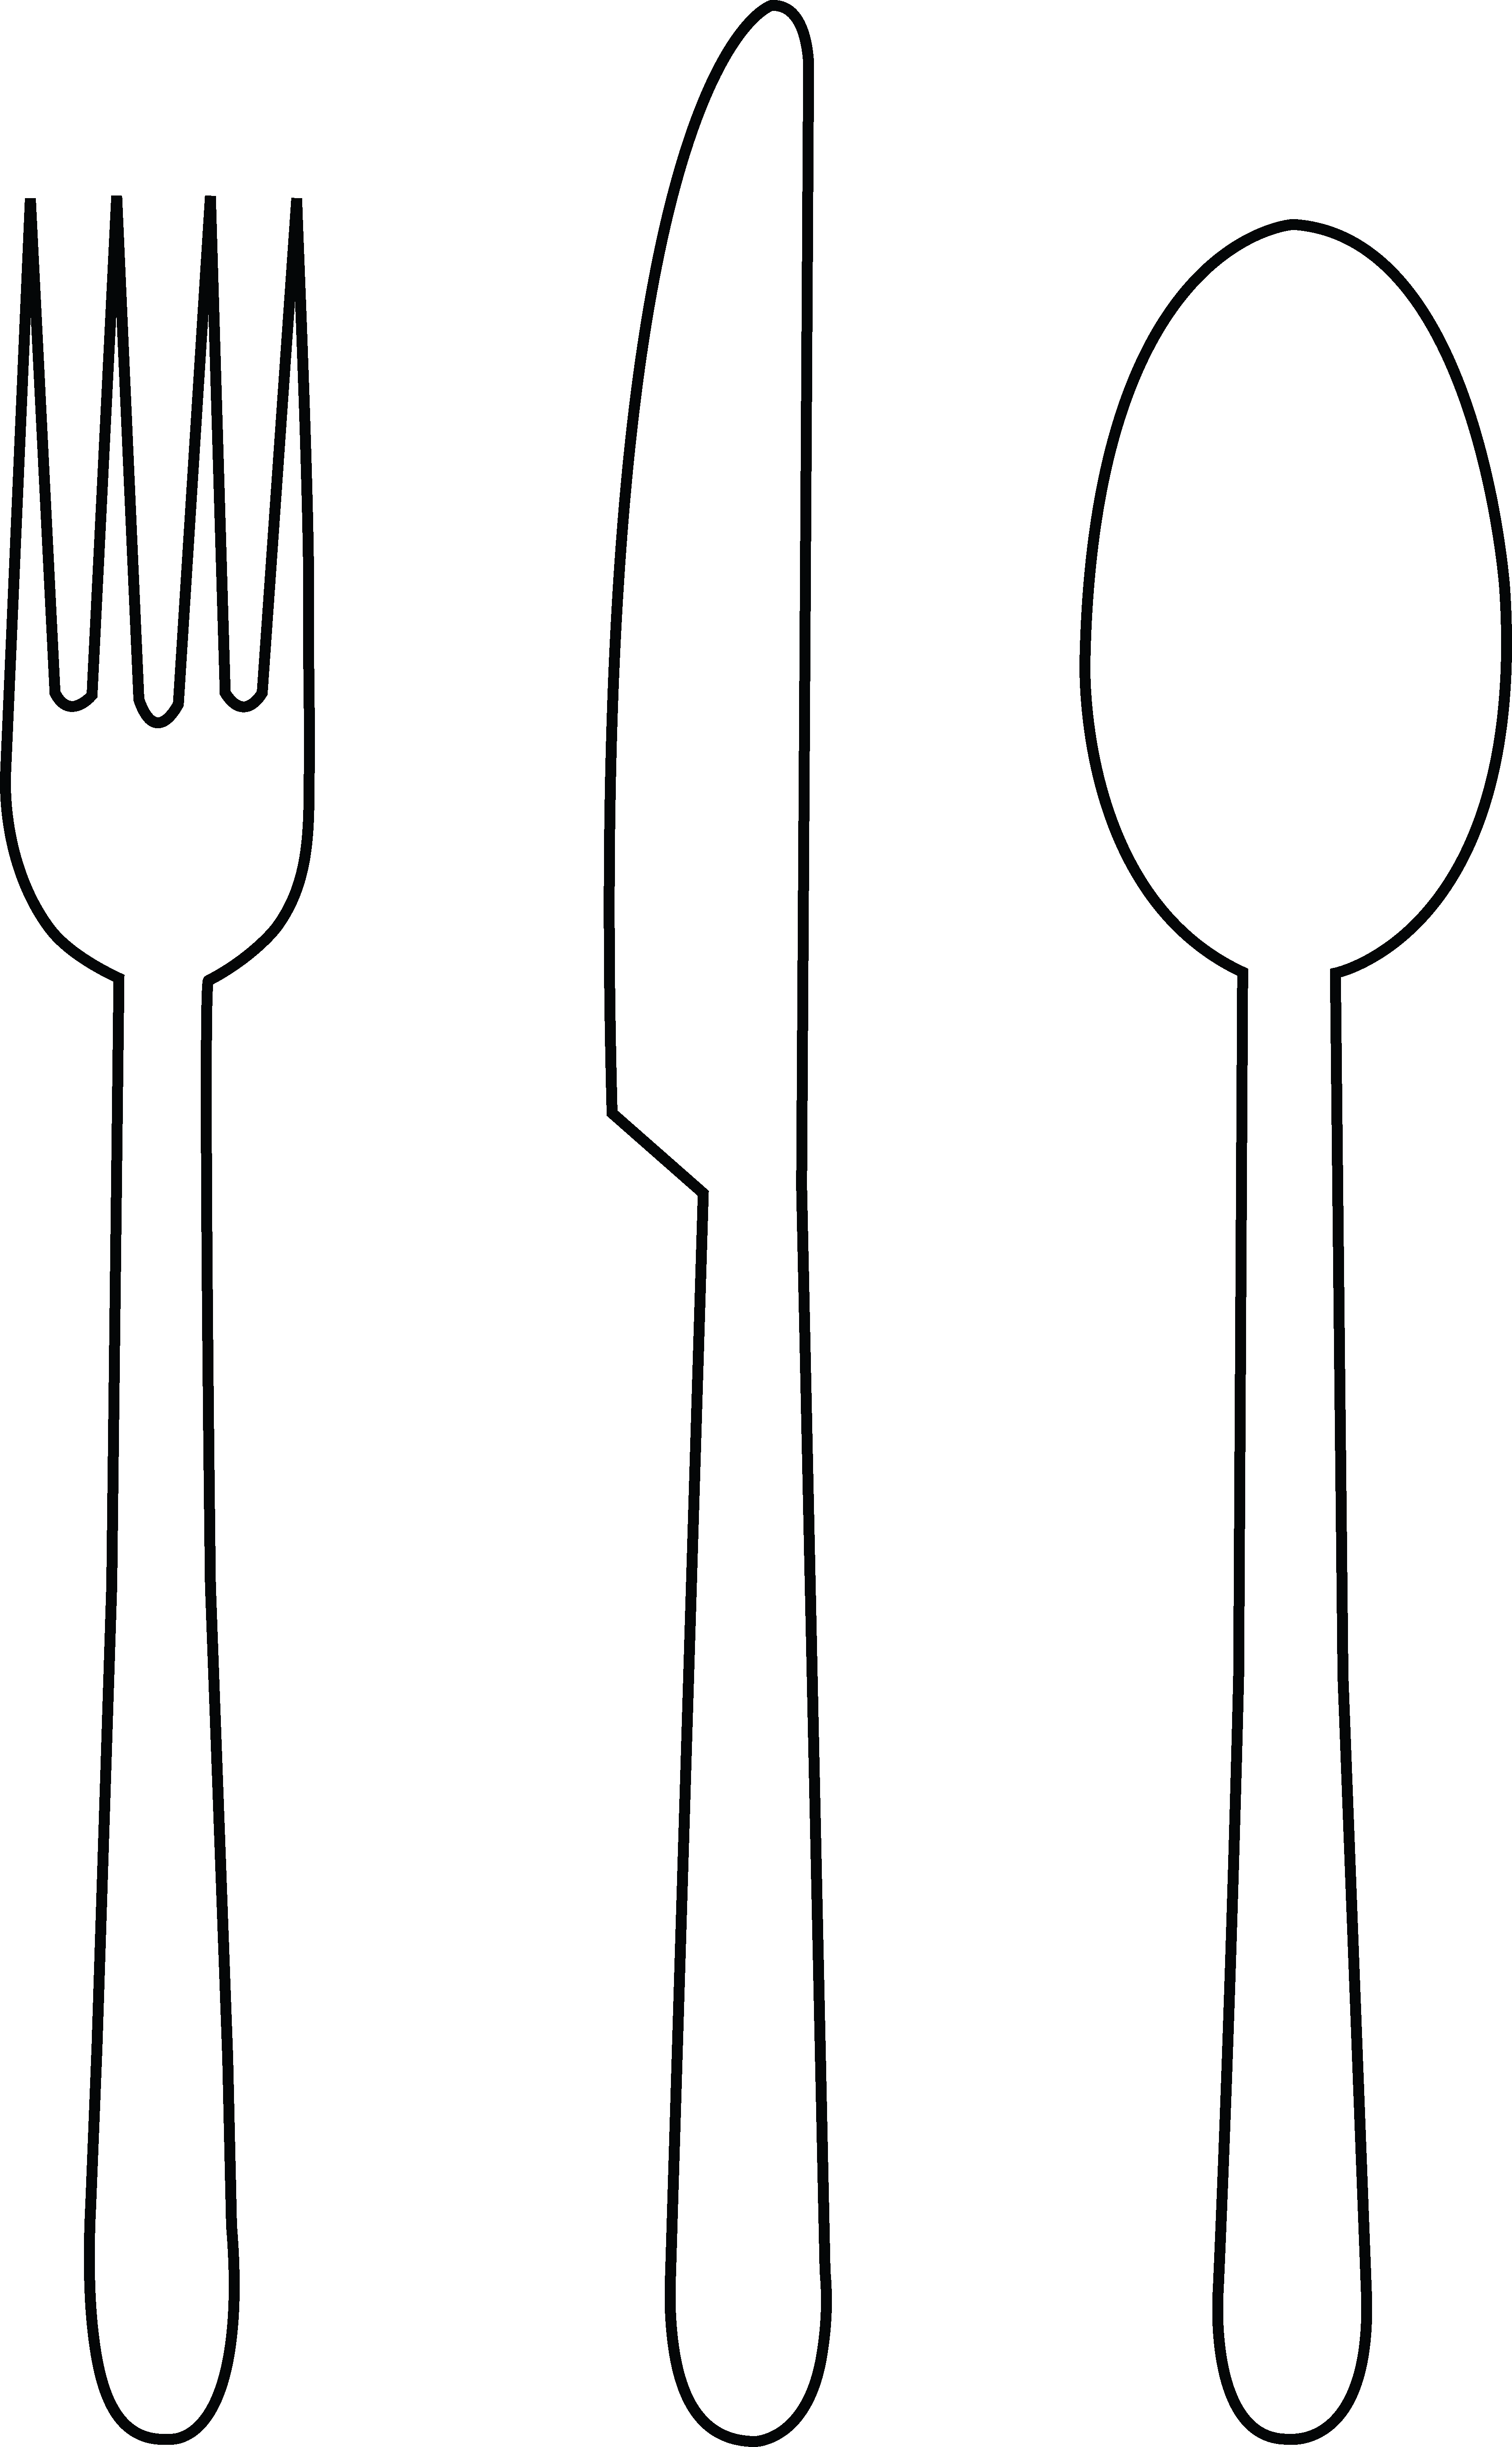 Knife And Fork FREE VECTOR - ClipArt Best